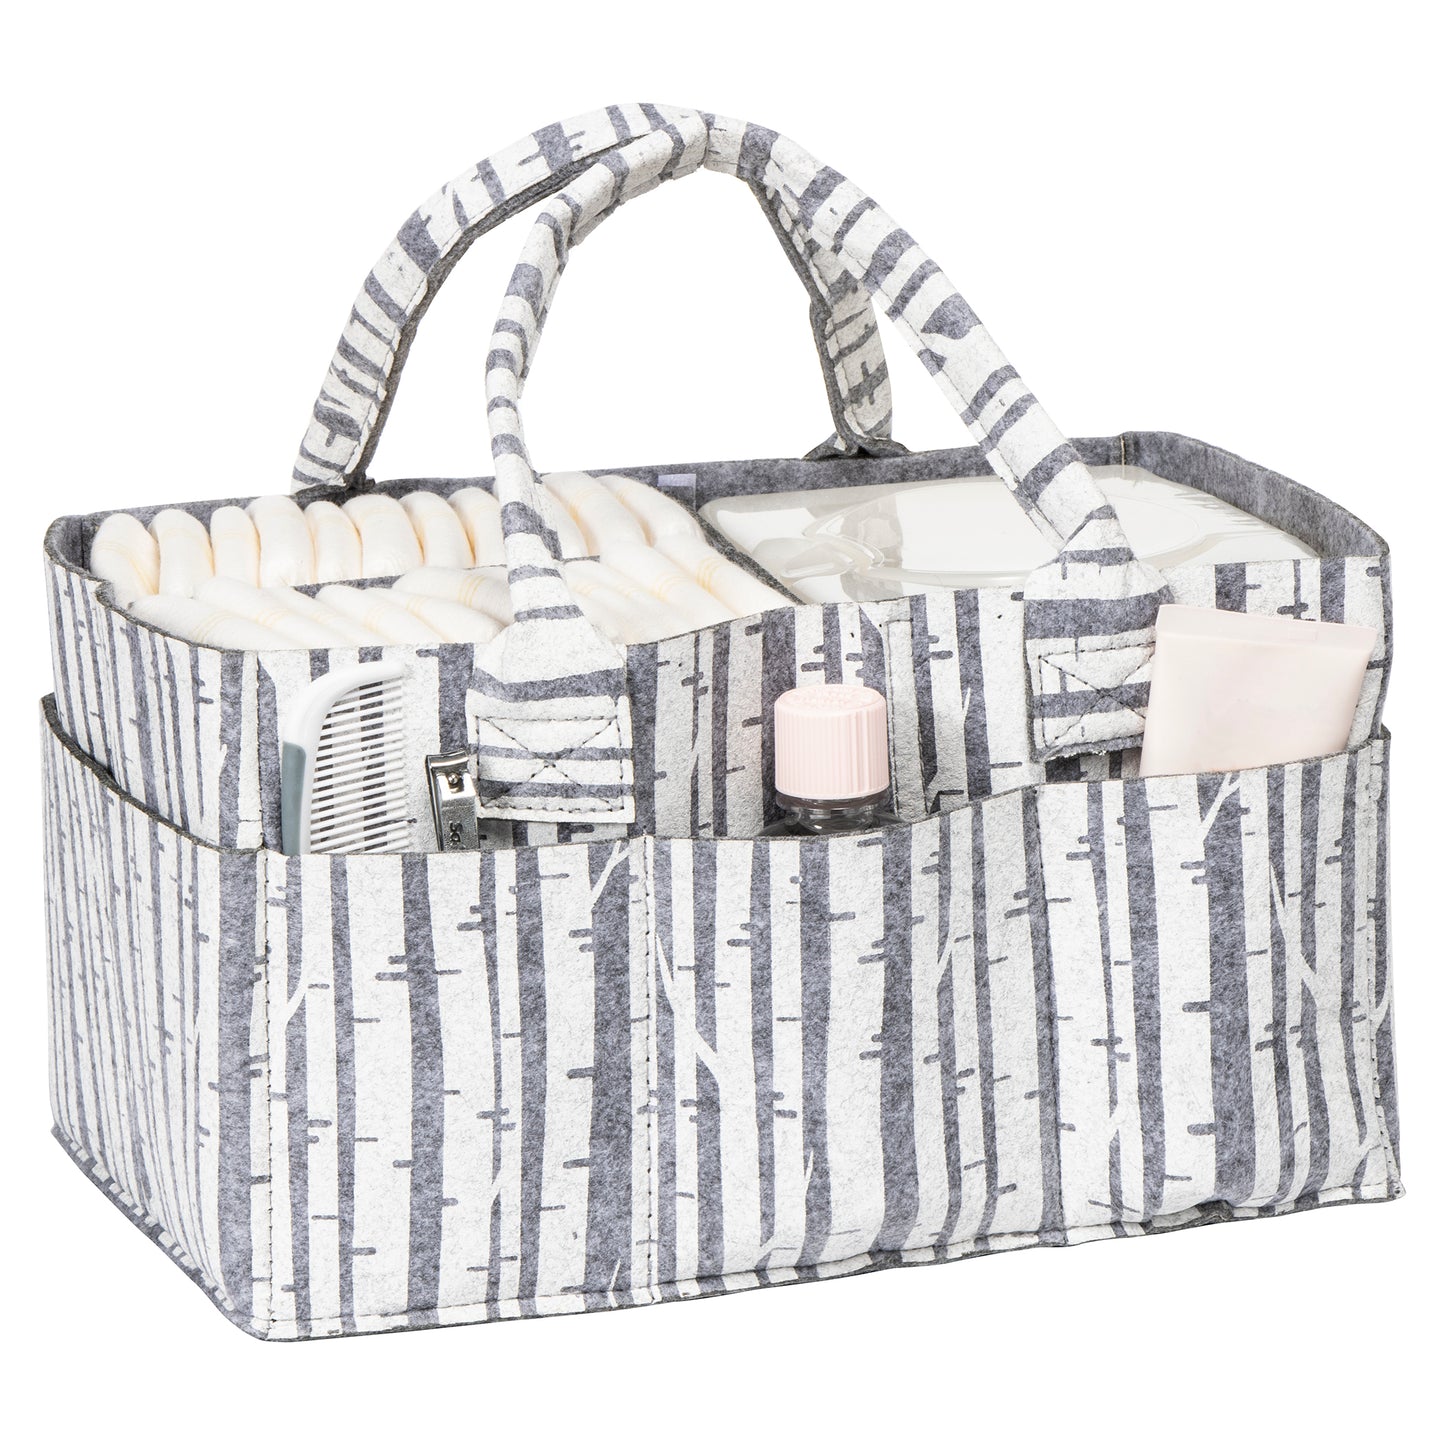 White printed birch pattern on gray felt storage caddy front view- Usage View by Sammy and Lou